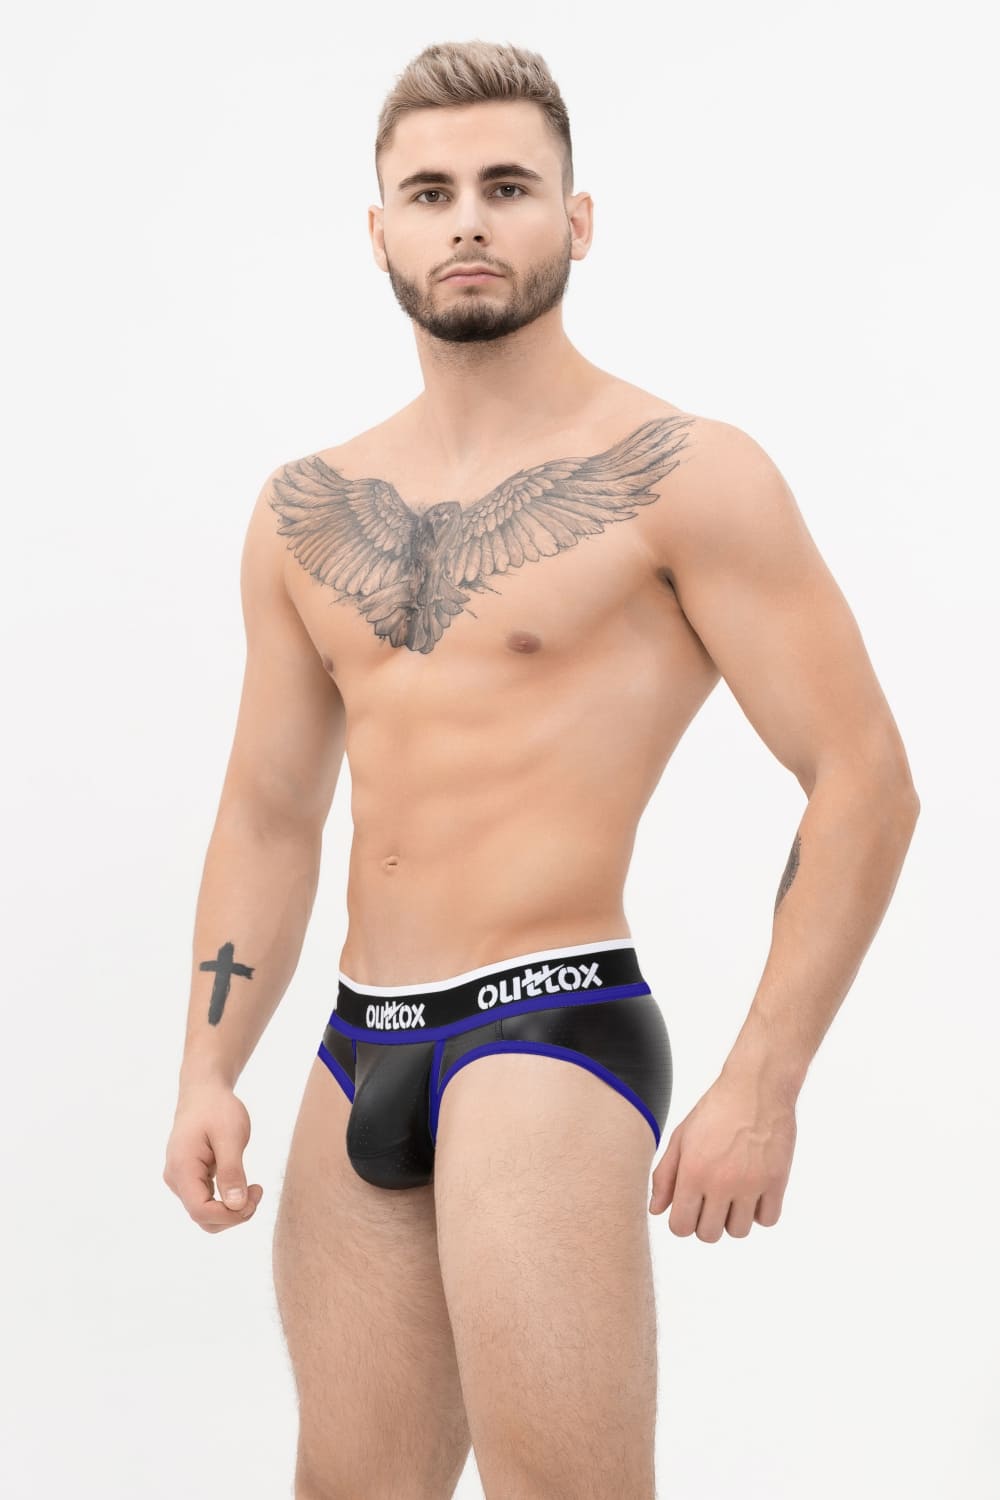 Outtox. Wrapped Rear Briefs with Snap Codpiece. Black+Blue 'Royal'